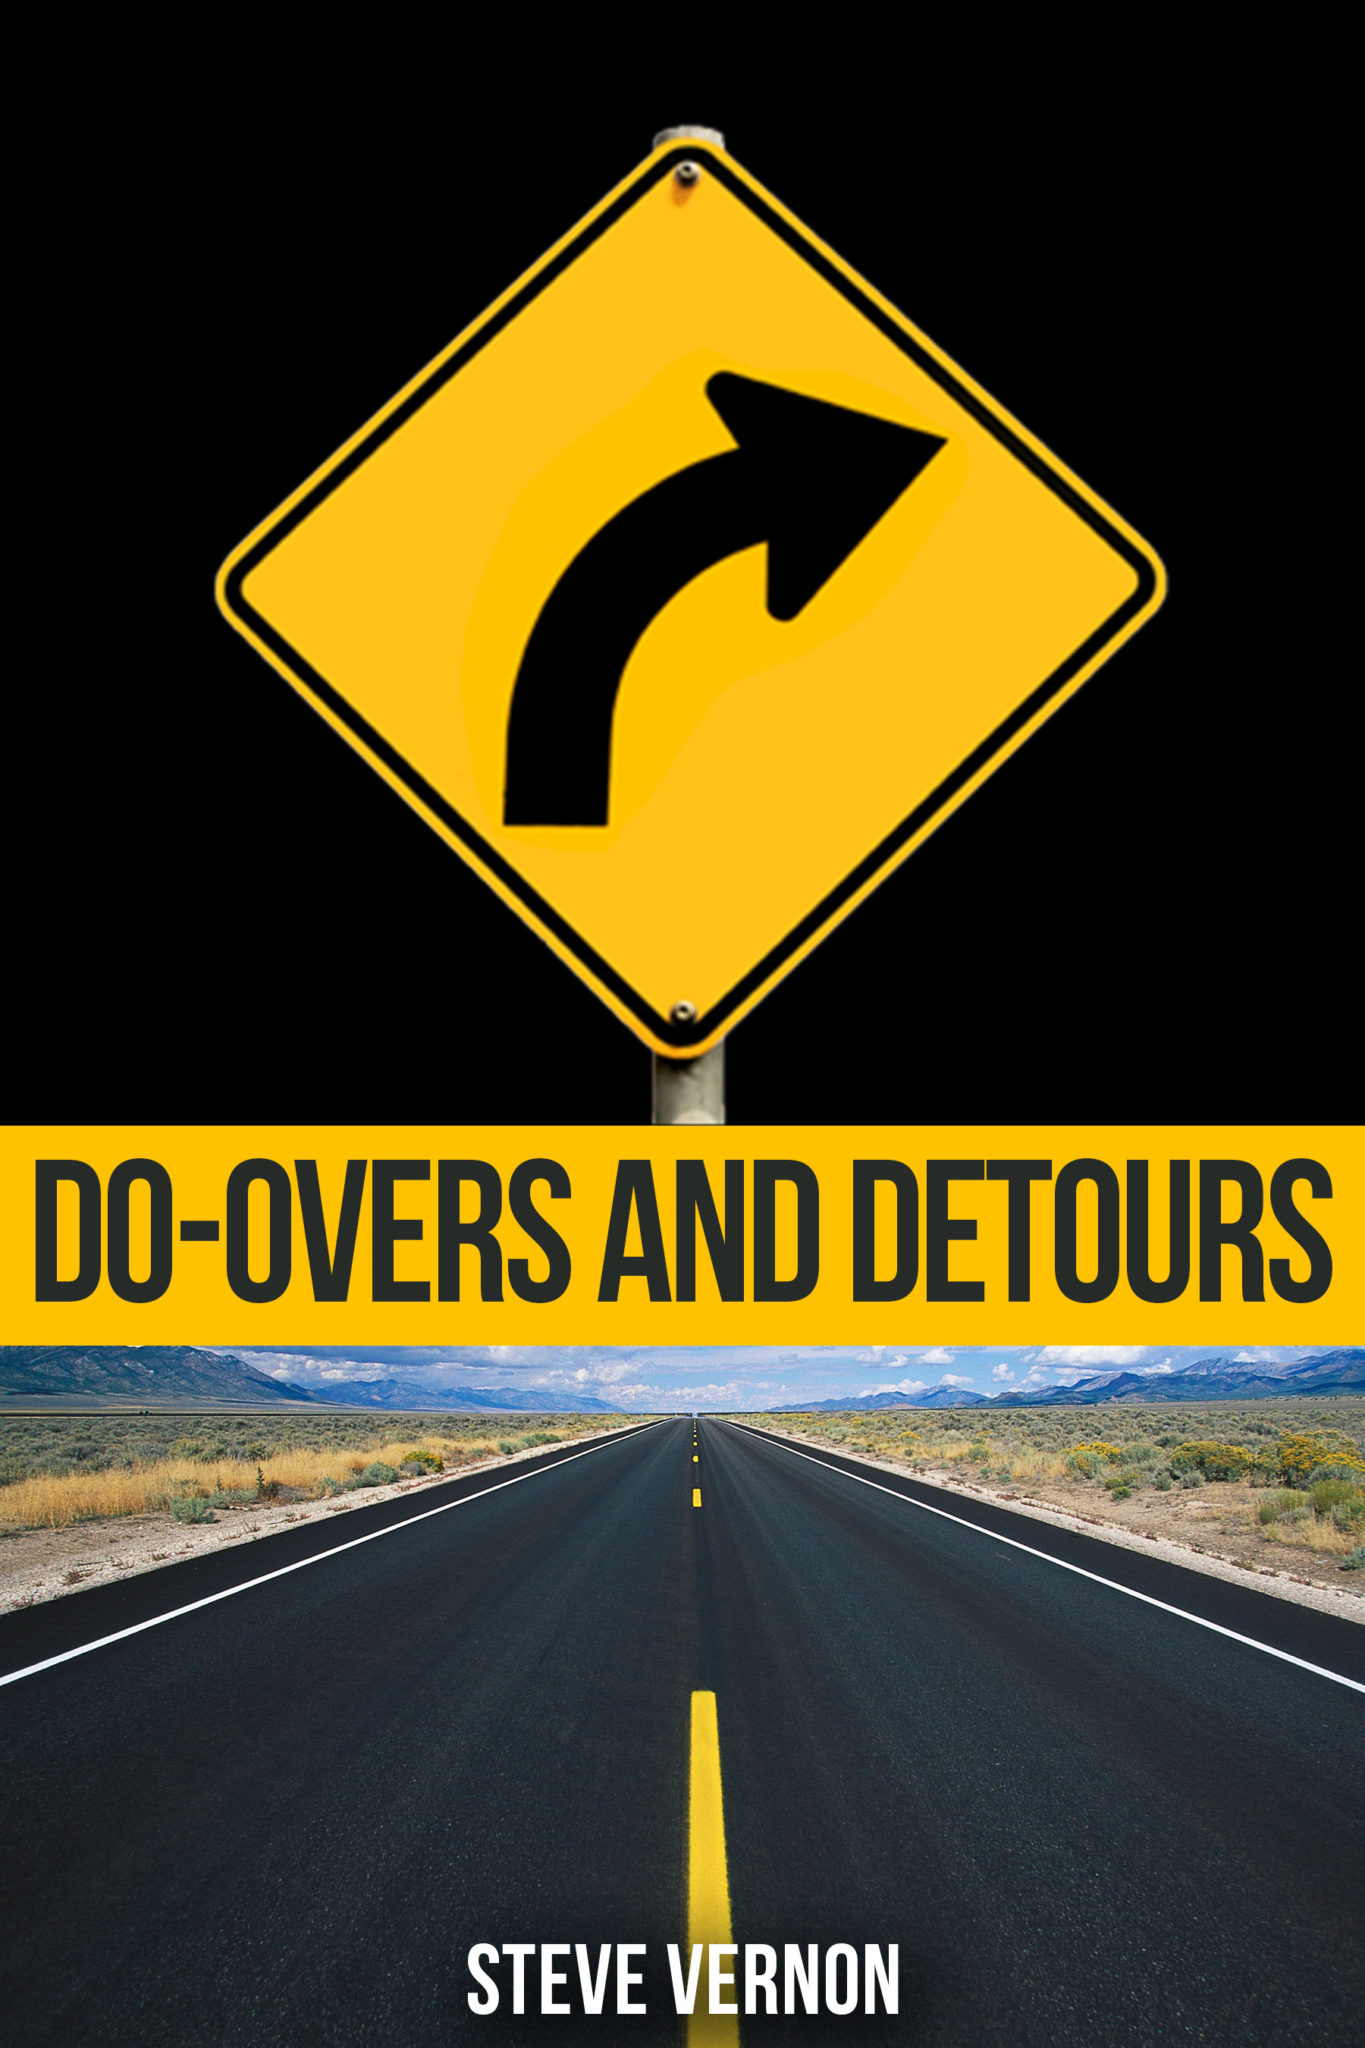 FREE: Do-Overs and Detours – Eighteen Eerie Tales by Steve Vernon